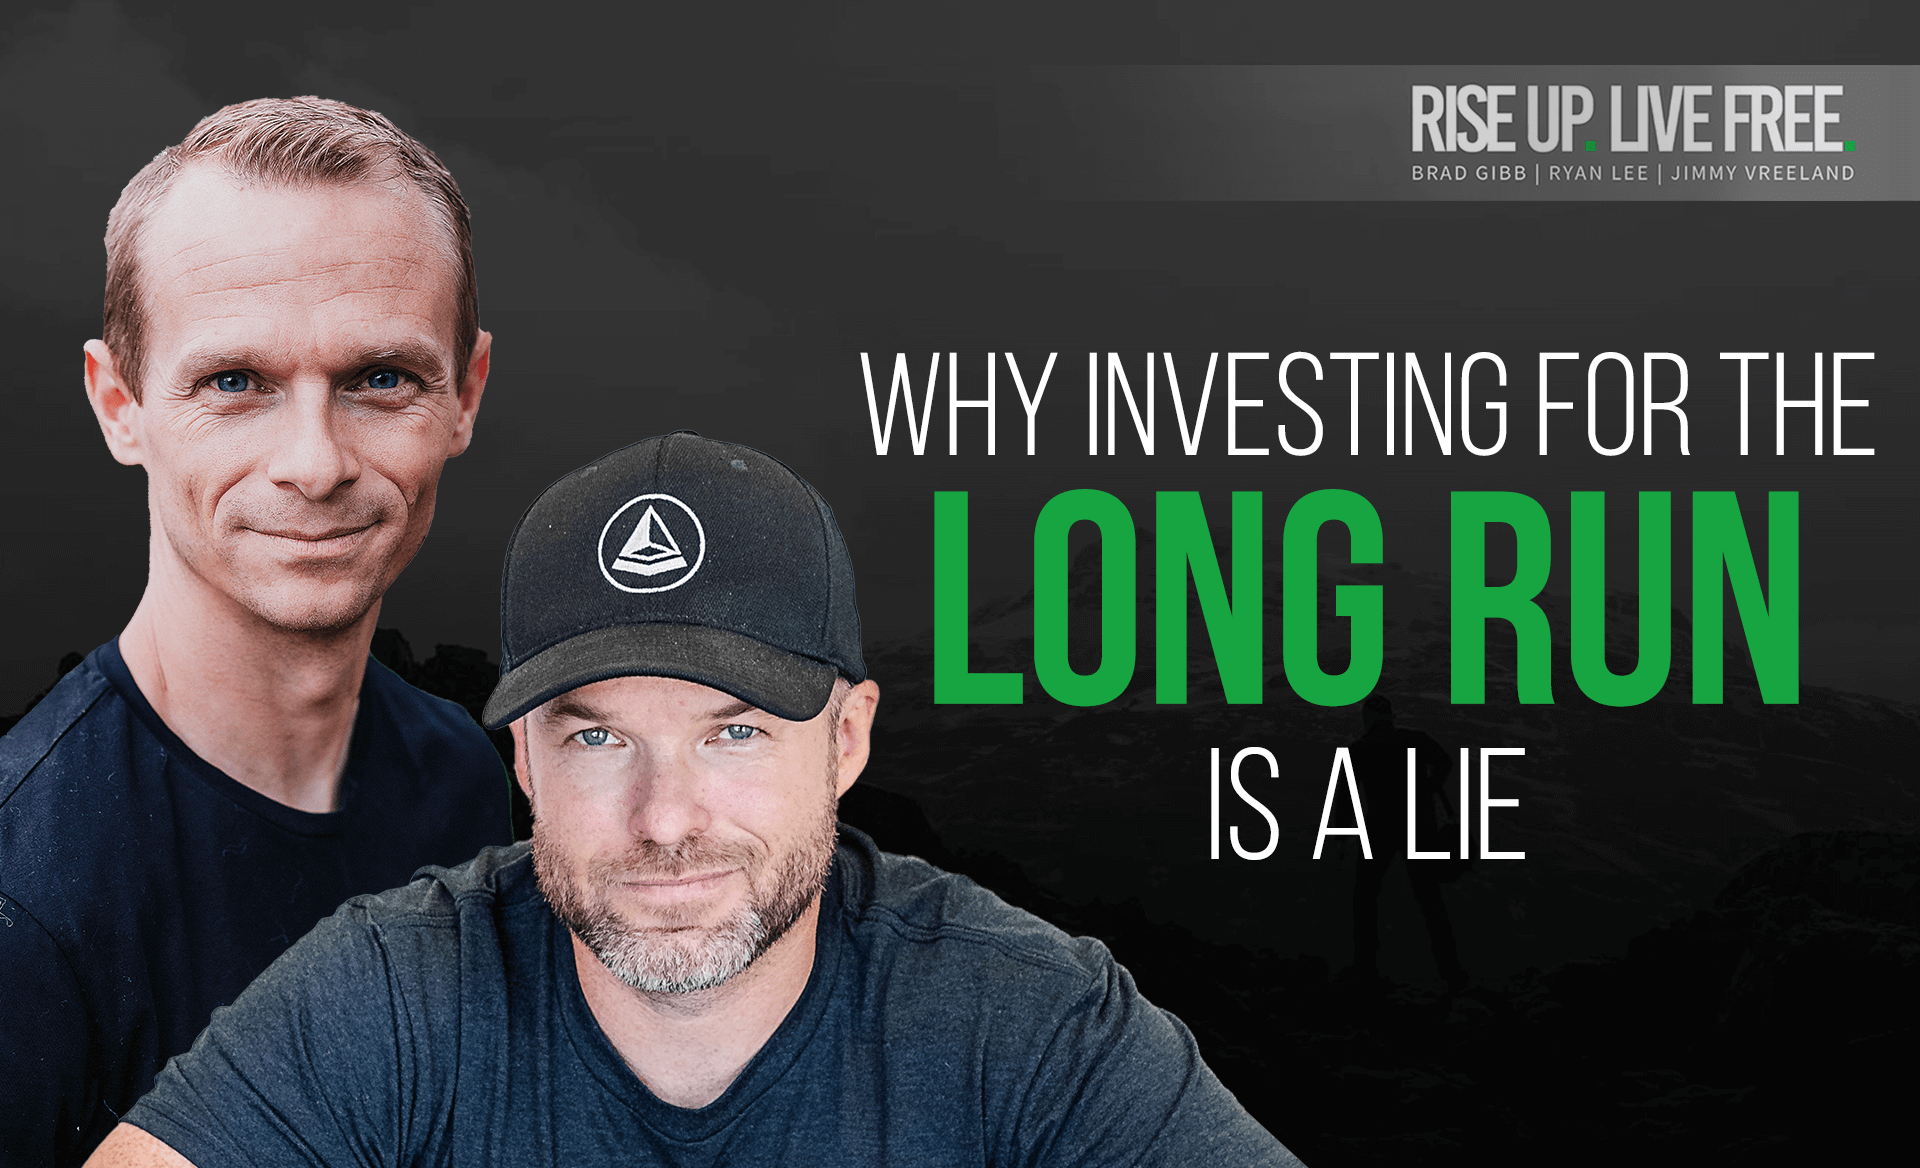 Why Investing For The Long Run Is A LIE...